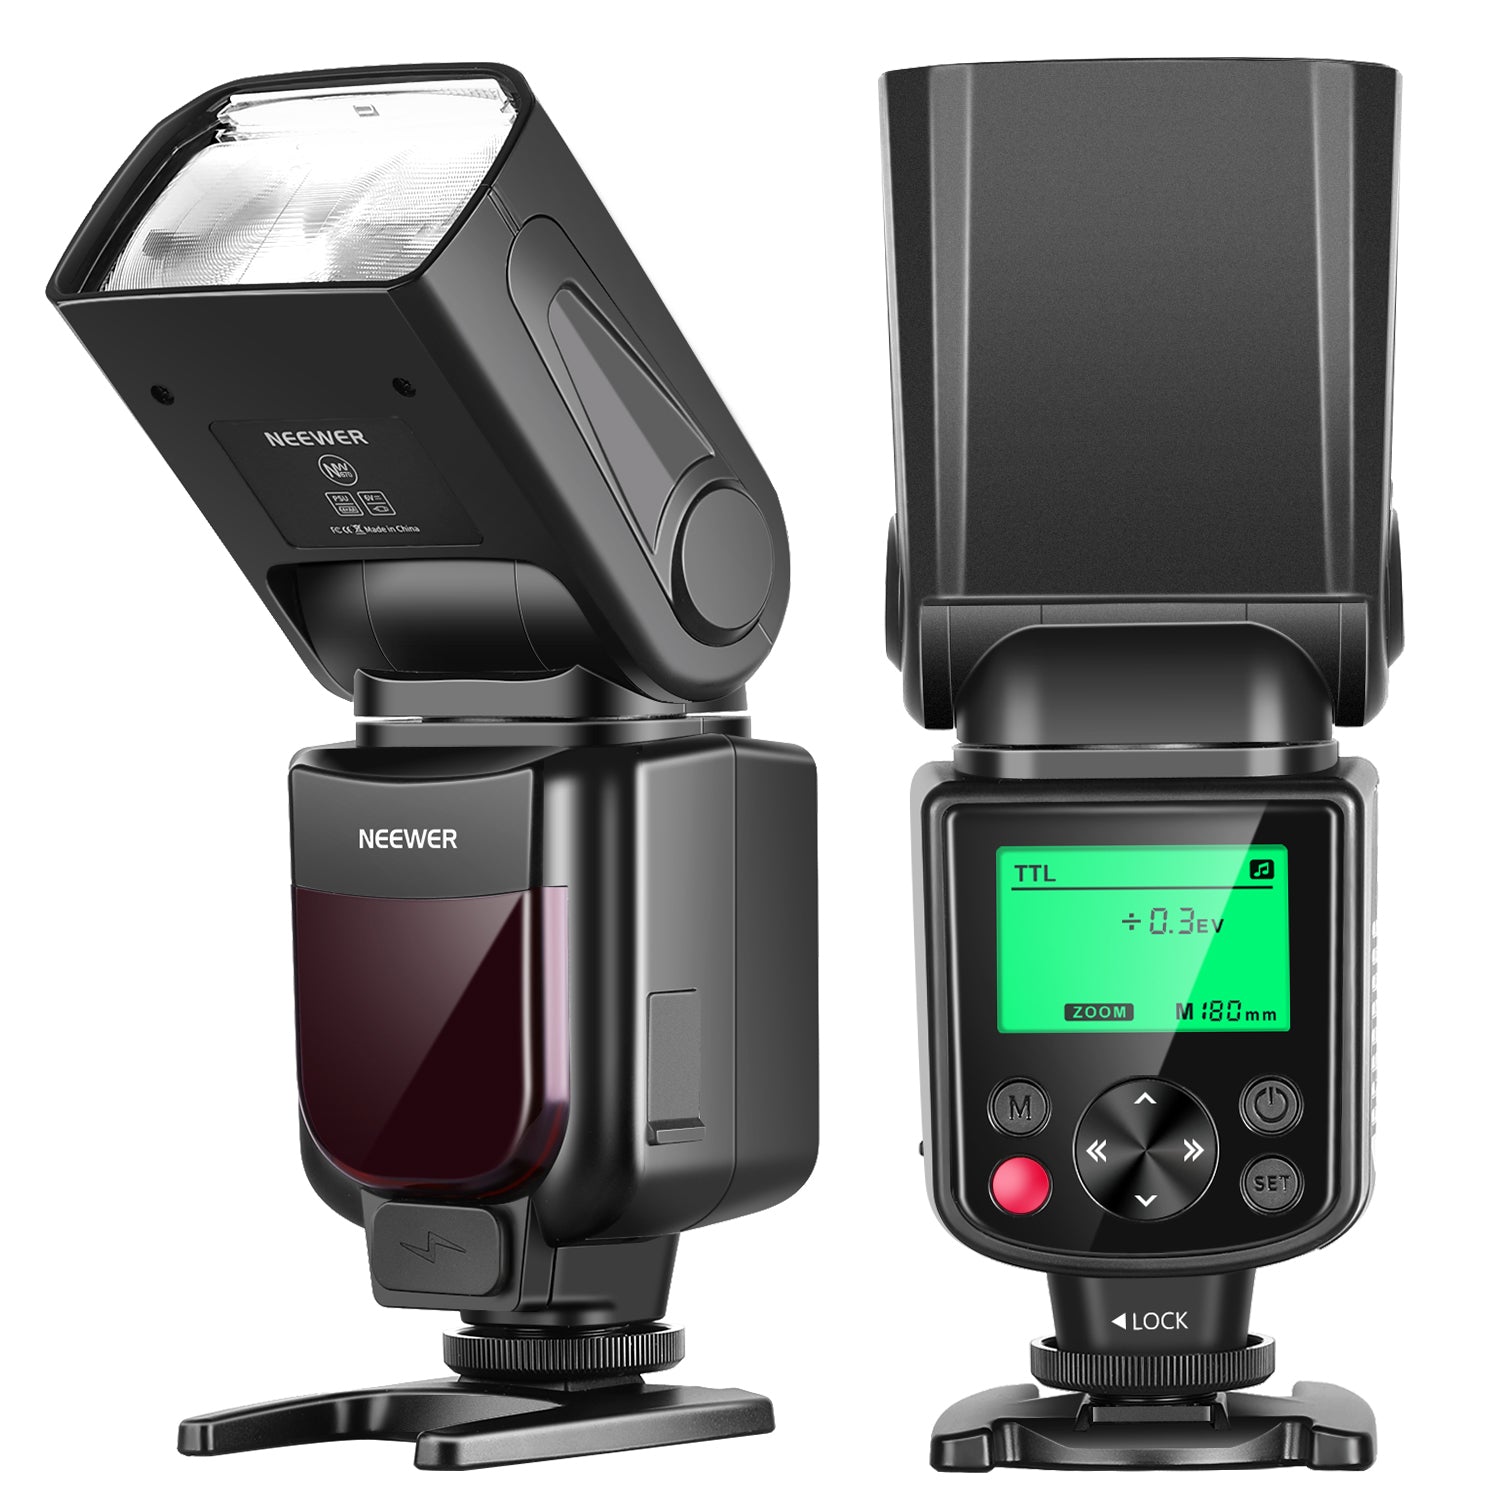 Neewer TT560 Flash Speedlite Review: Reliable performance in a dead-simple  package